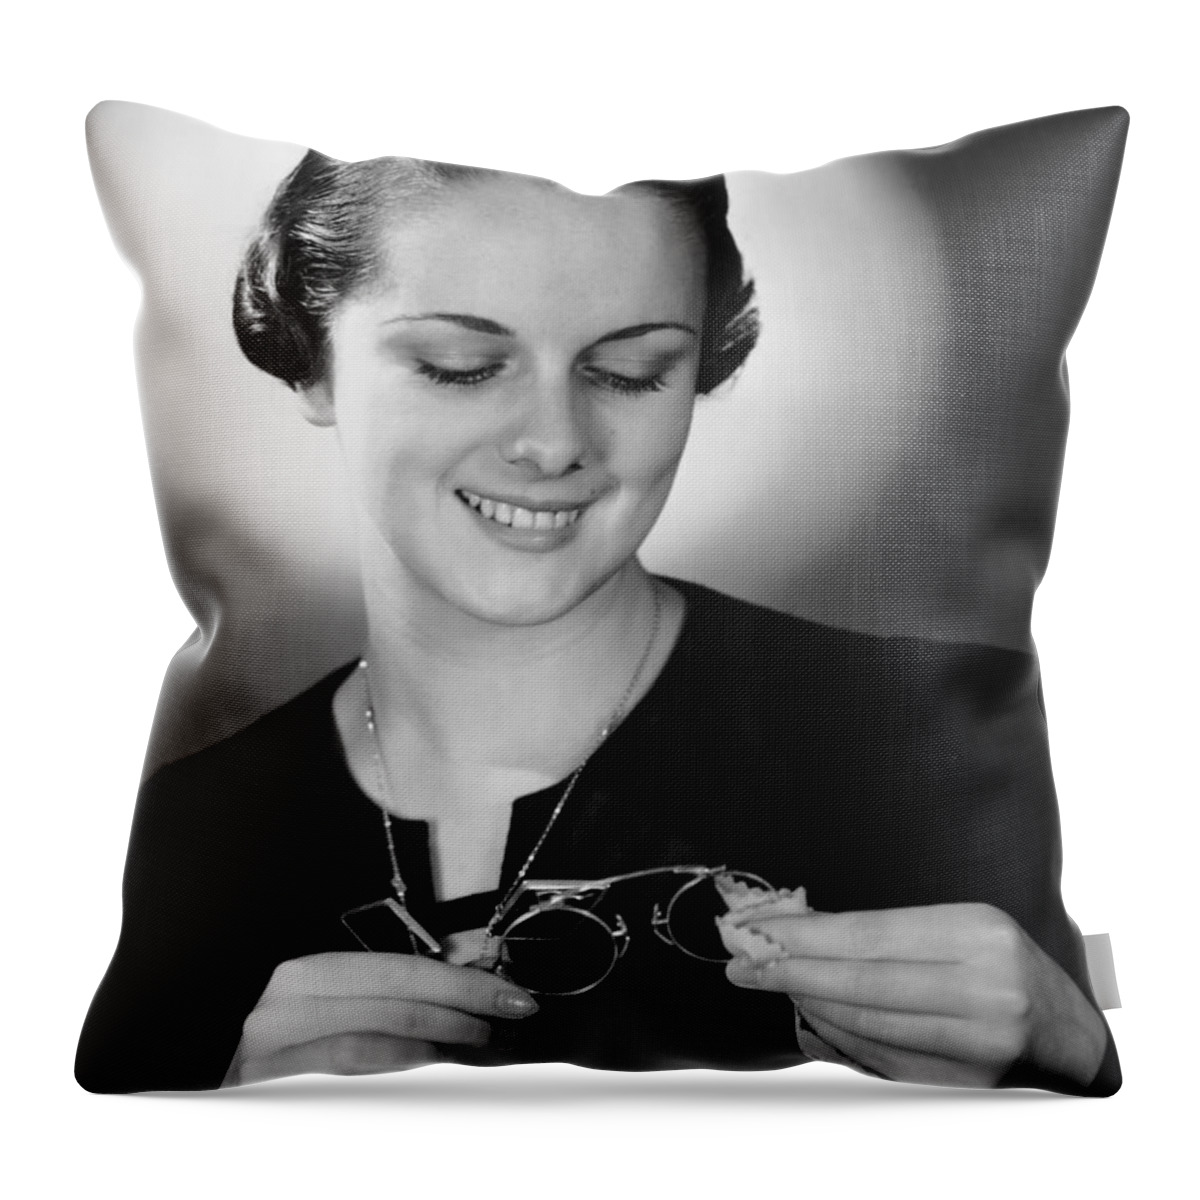 People Throw Pillow featuring the photograph Portrait Of Woman Cleaning Eyeglasses by George Marks